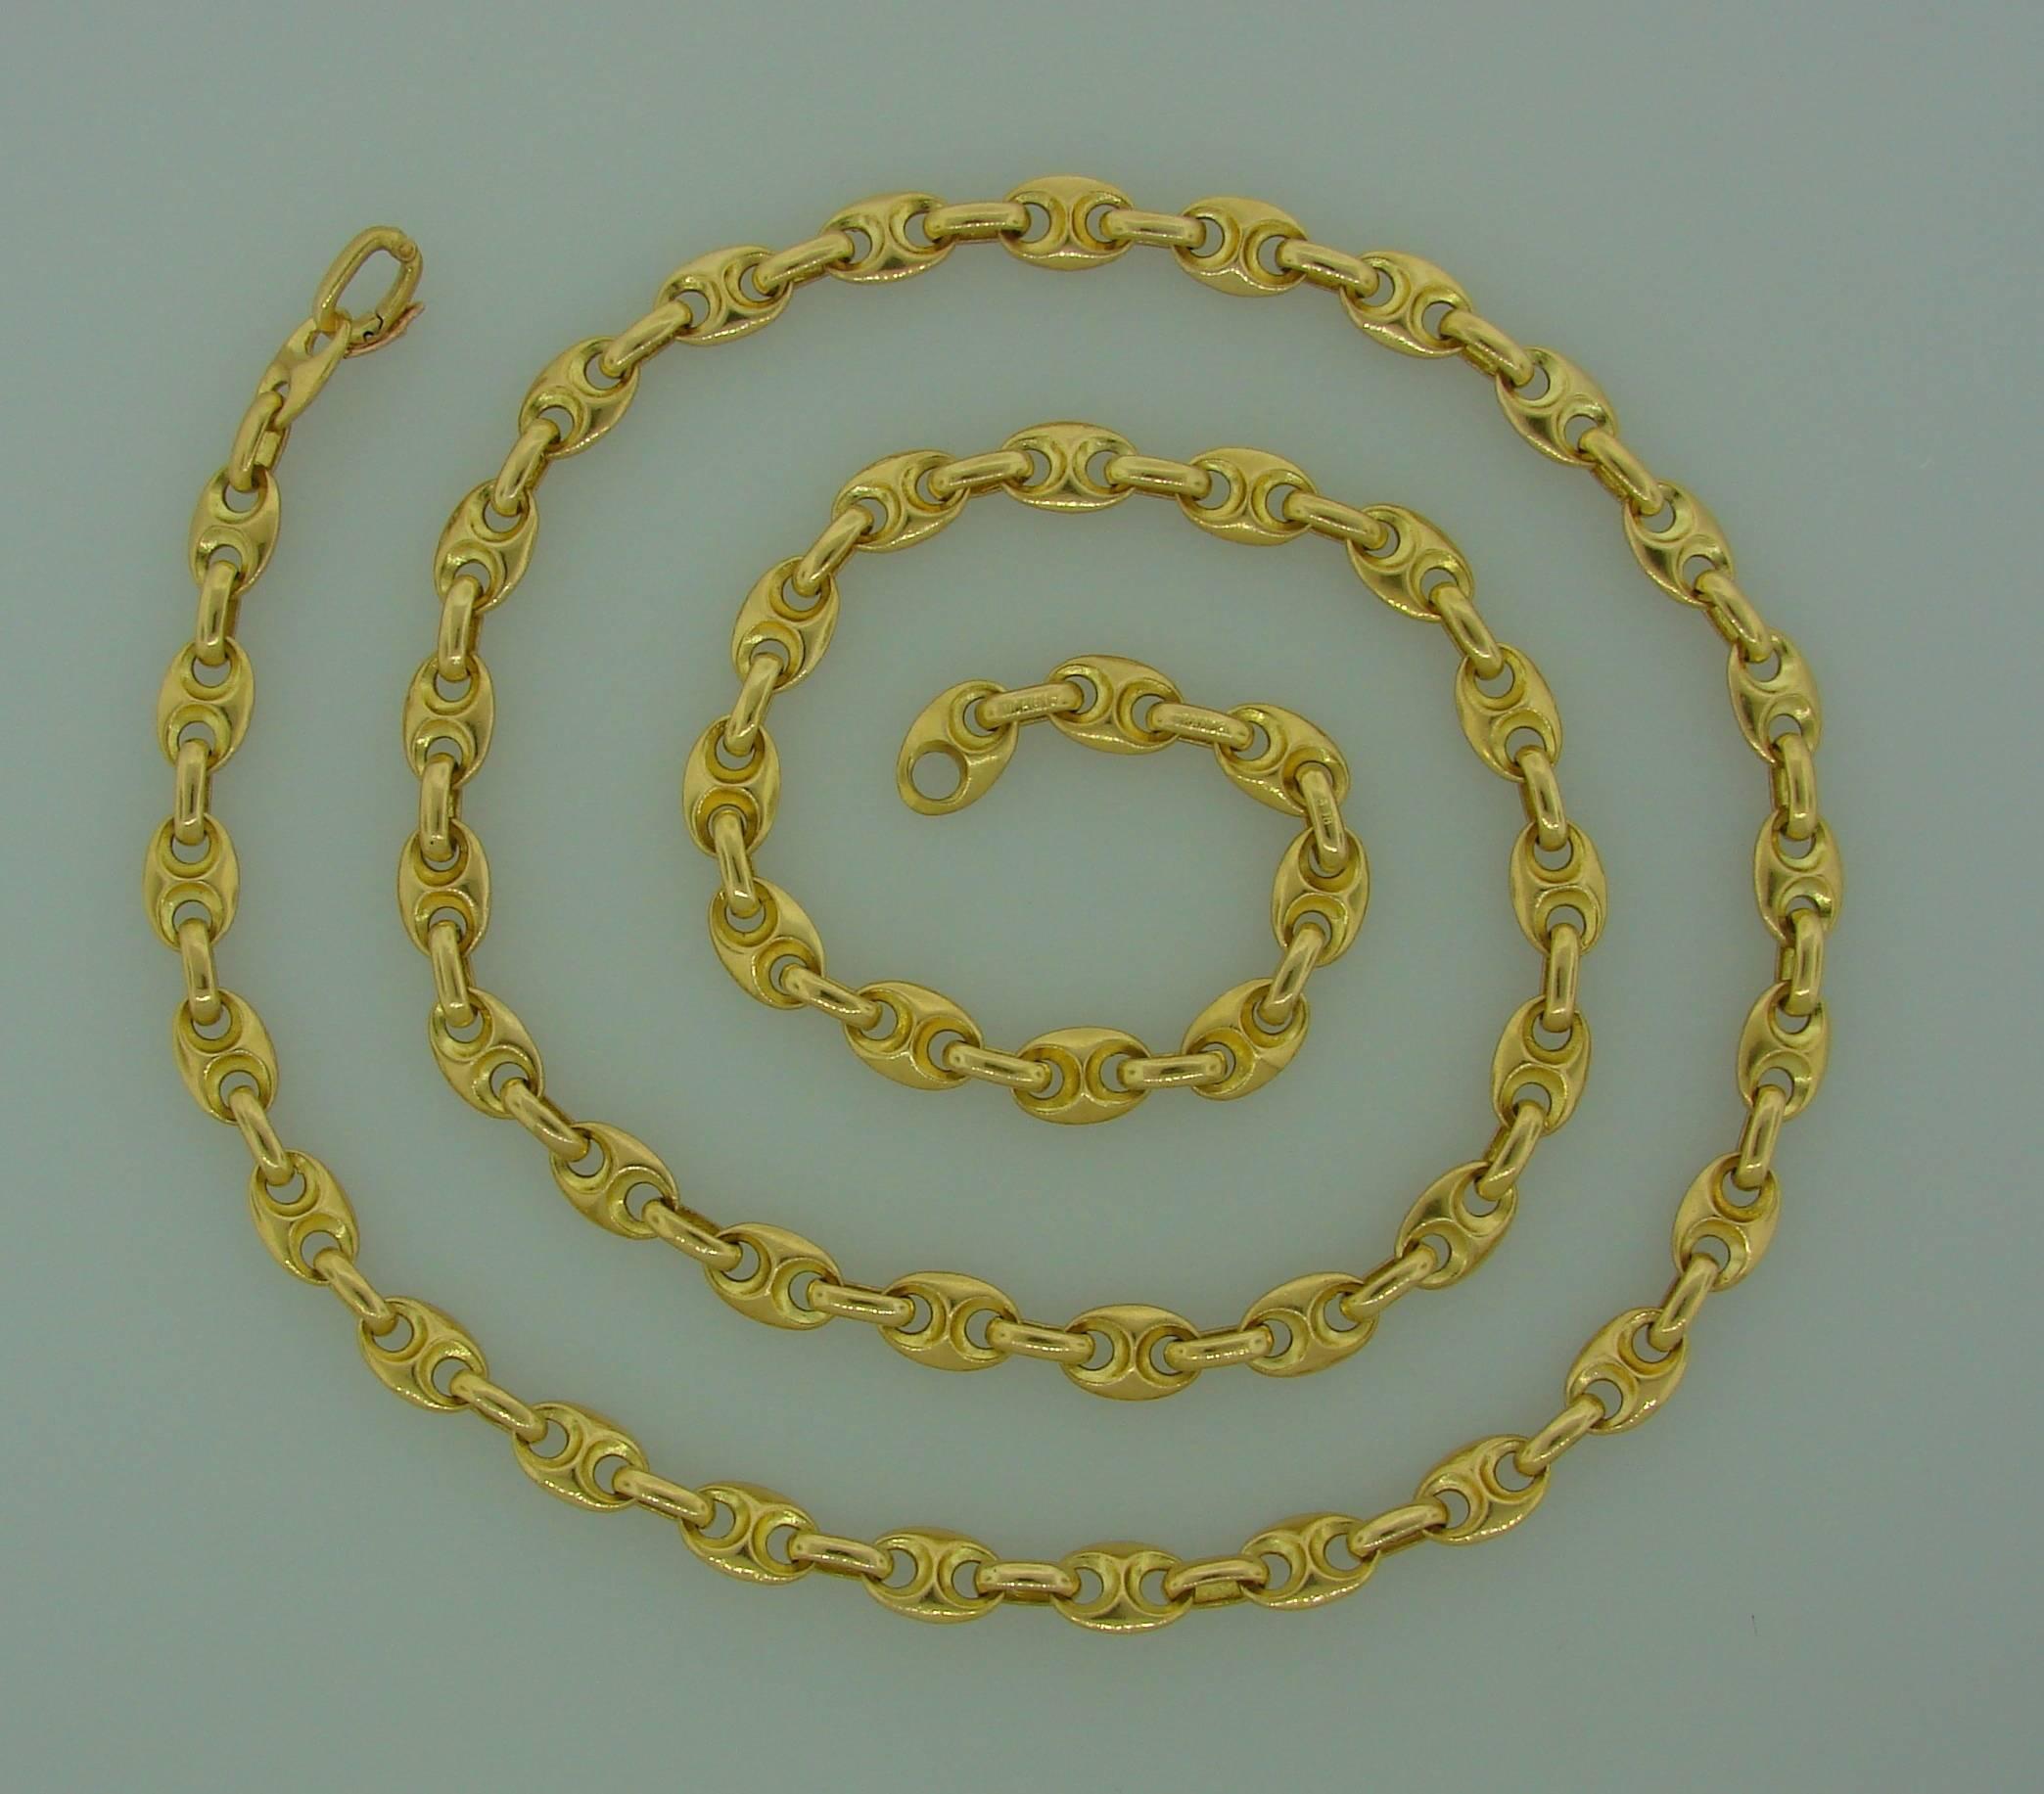 Classy nautical link chain necklace created by Van Cleef & Arpels in Paris in the 1970's. Elegant, timeless and wearable, the chain is a great addition to your jewelry collection.
Made of 18 karat (stamped) yellow gold. 
Measures 30 x 1/4 inches